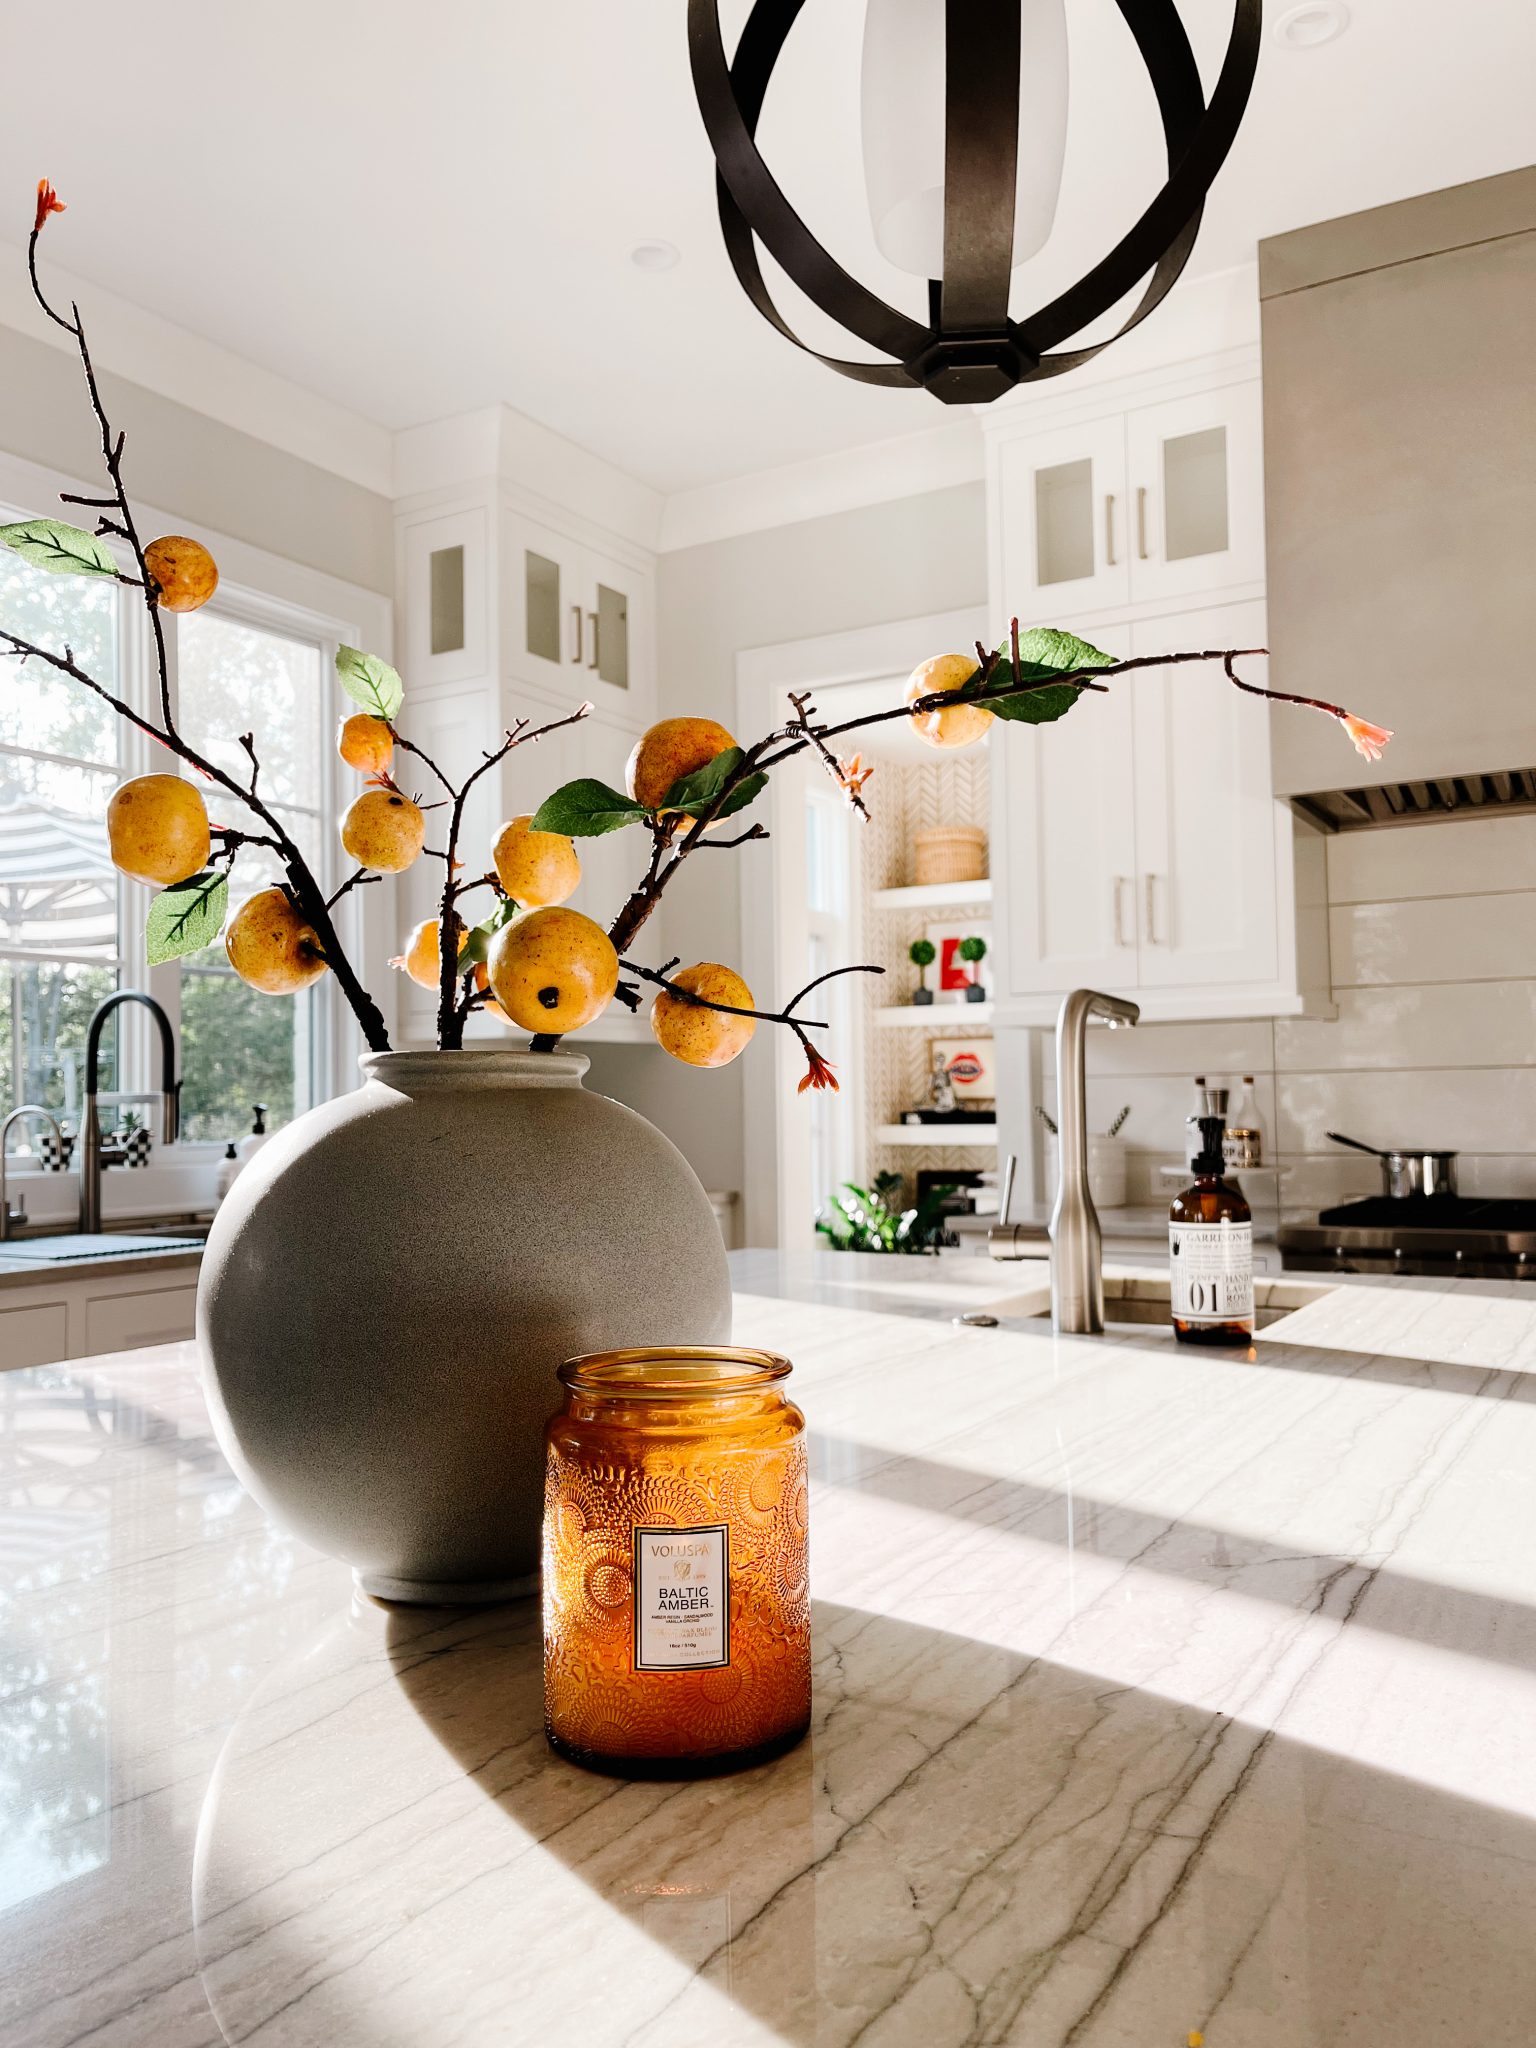 A round blue vase on the kitchen island holding pear branches next to a fall candle. 